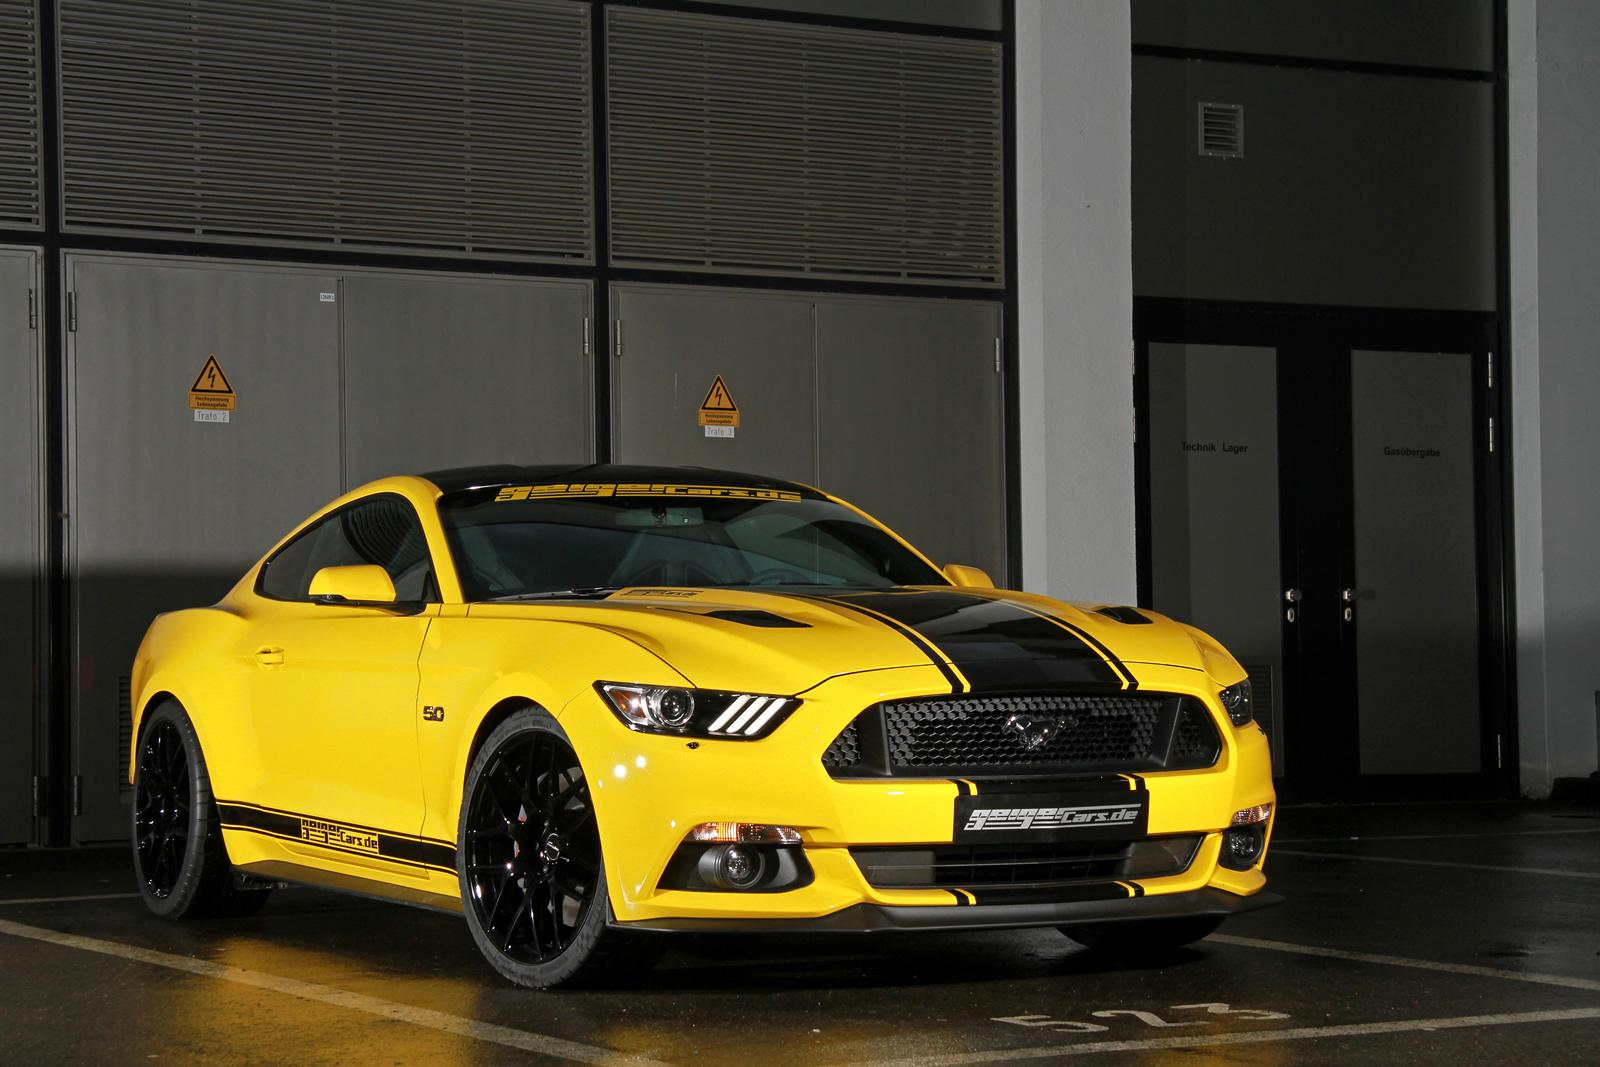 Supercharged Mustang from Geiger Cars Churns Out 709 Horsepower – Photo